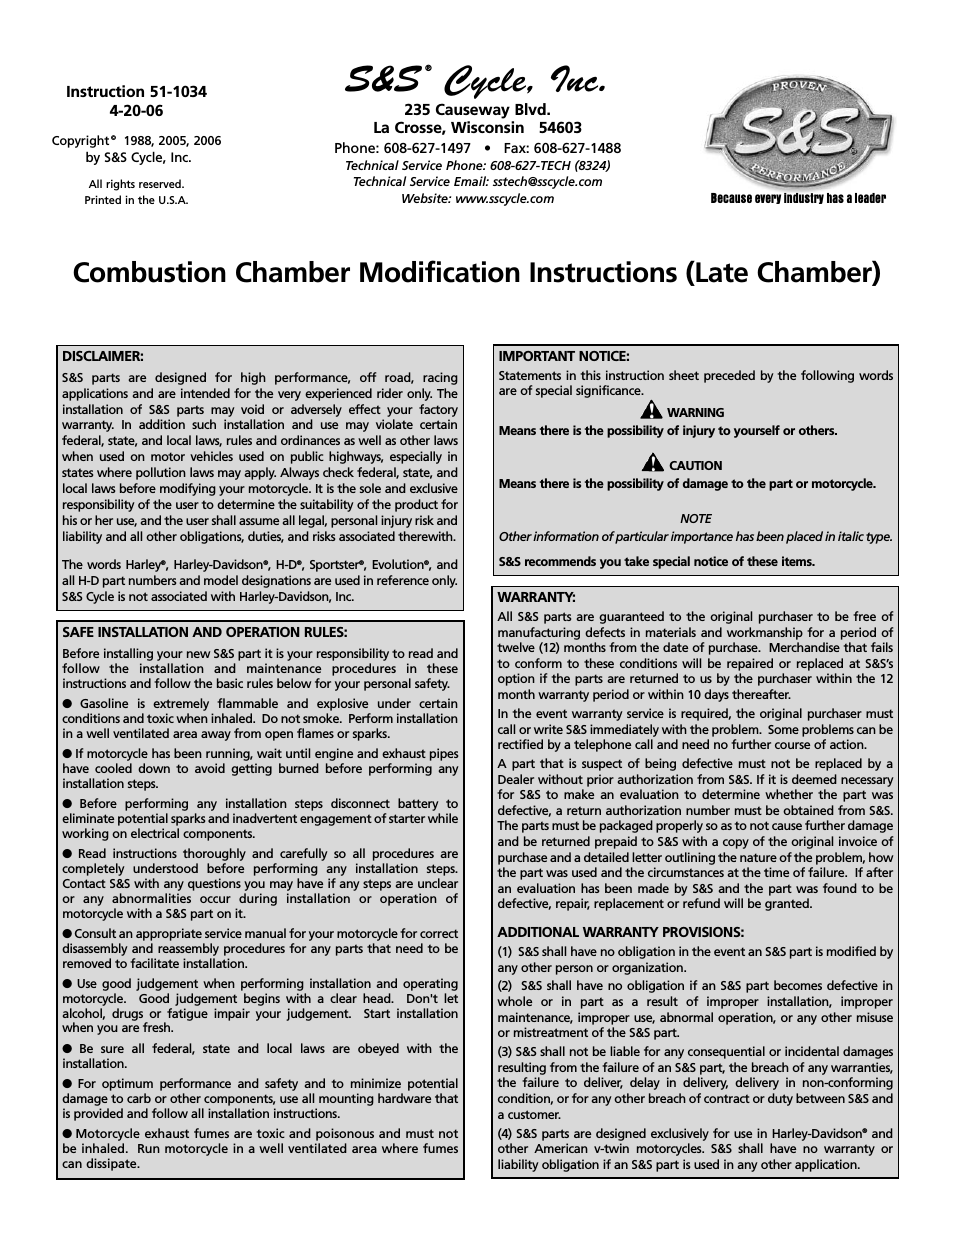 Combustion Chamber Modification Instructions (Late Chamber)